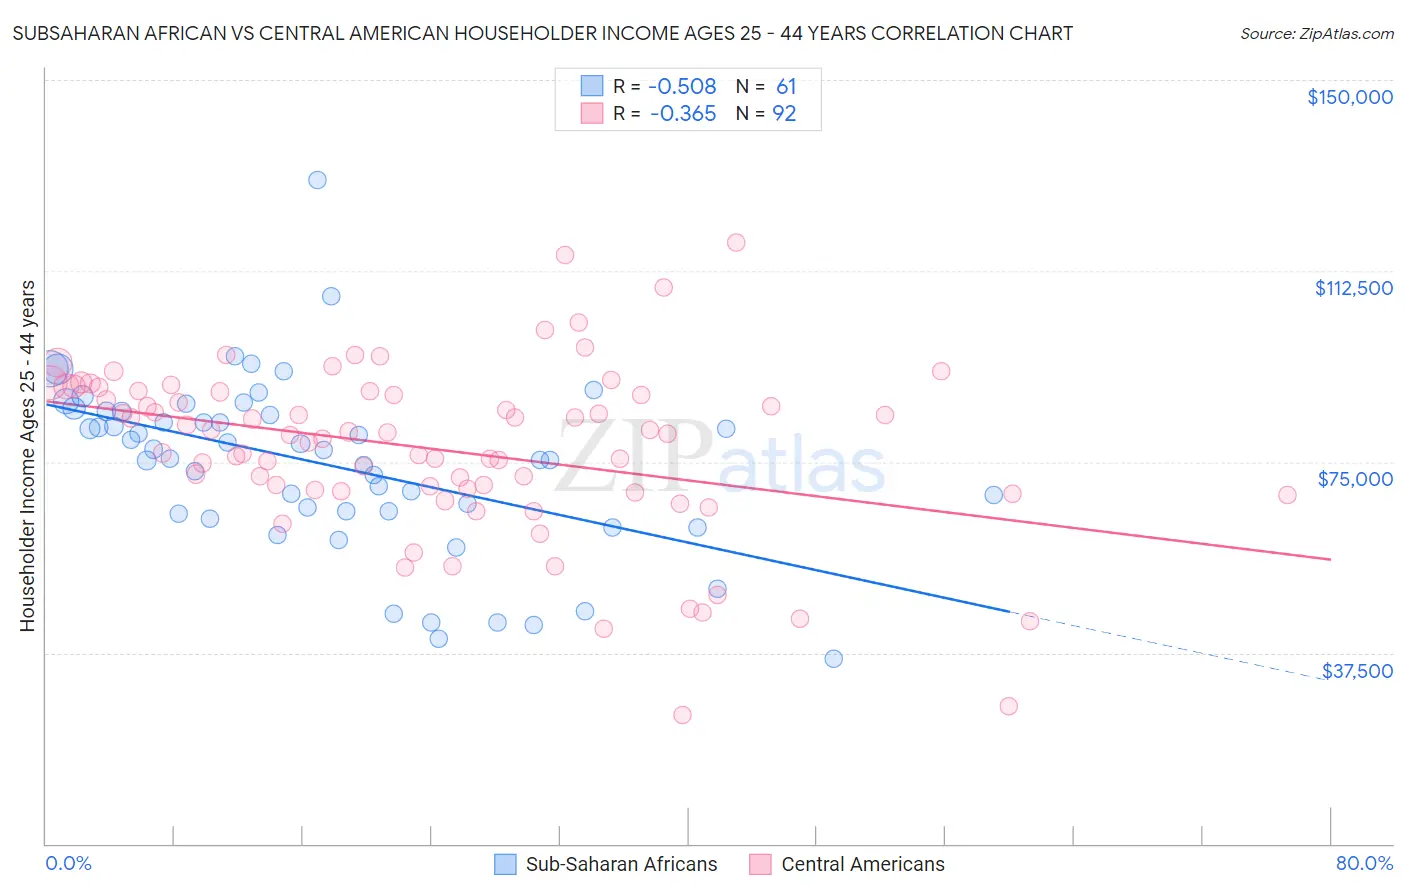 Subsaharan African vs Central American Householder Income Ages 25 - 44 years